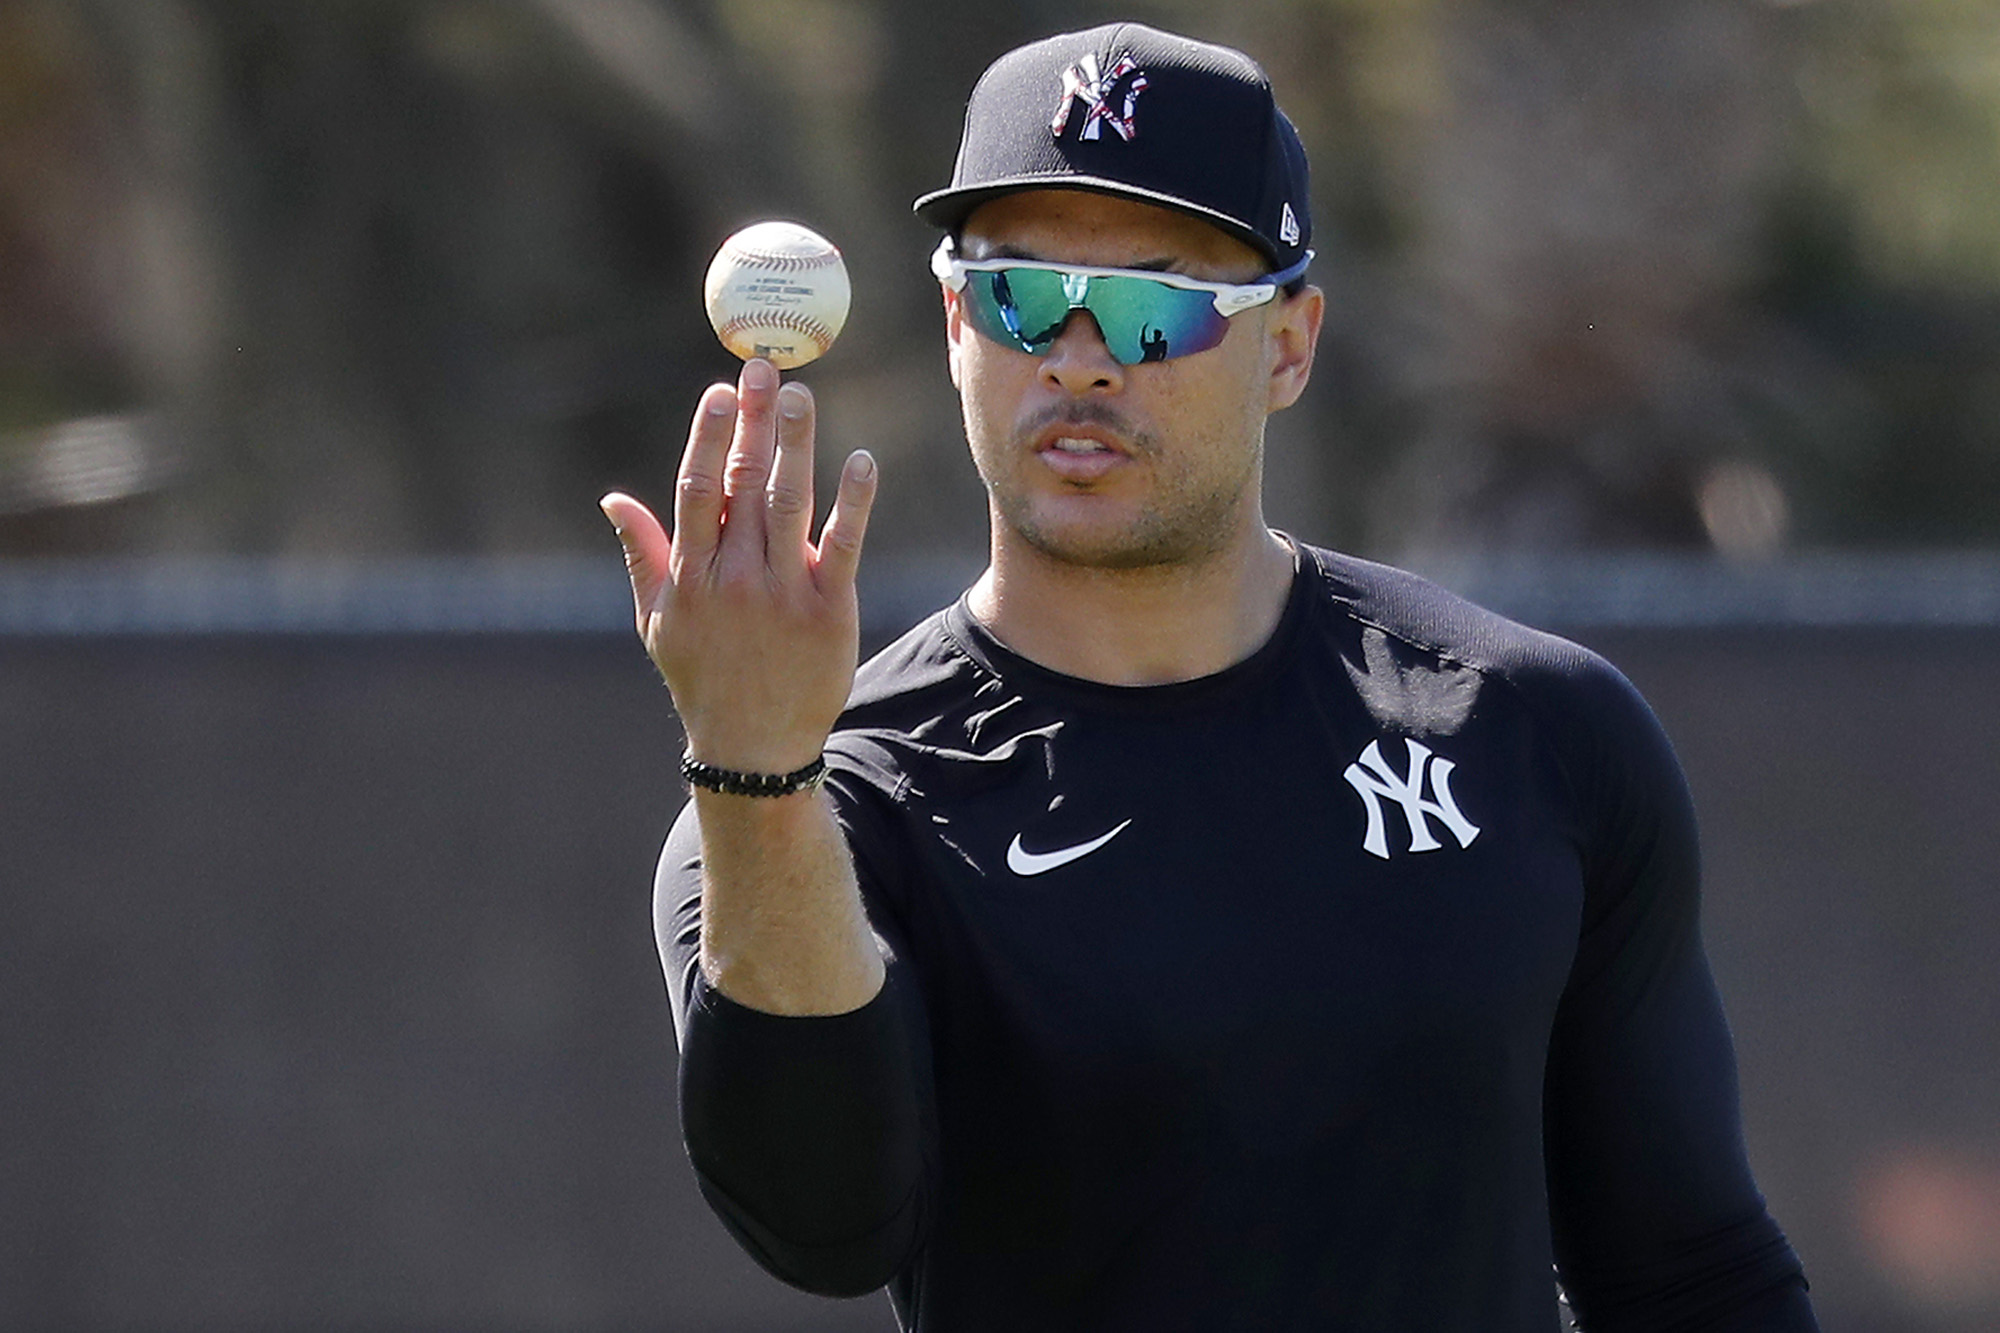 Giancarlo Stanton snaps out of his sad Yankees mood